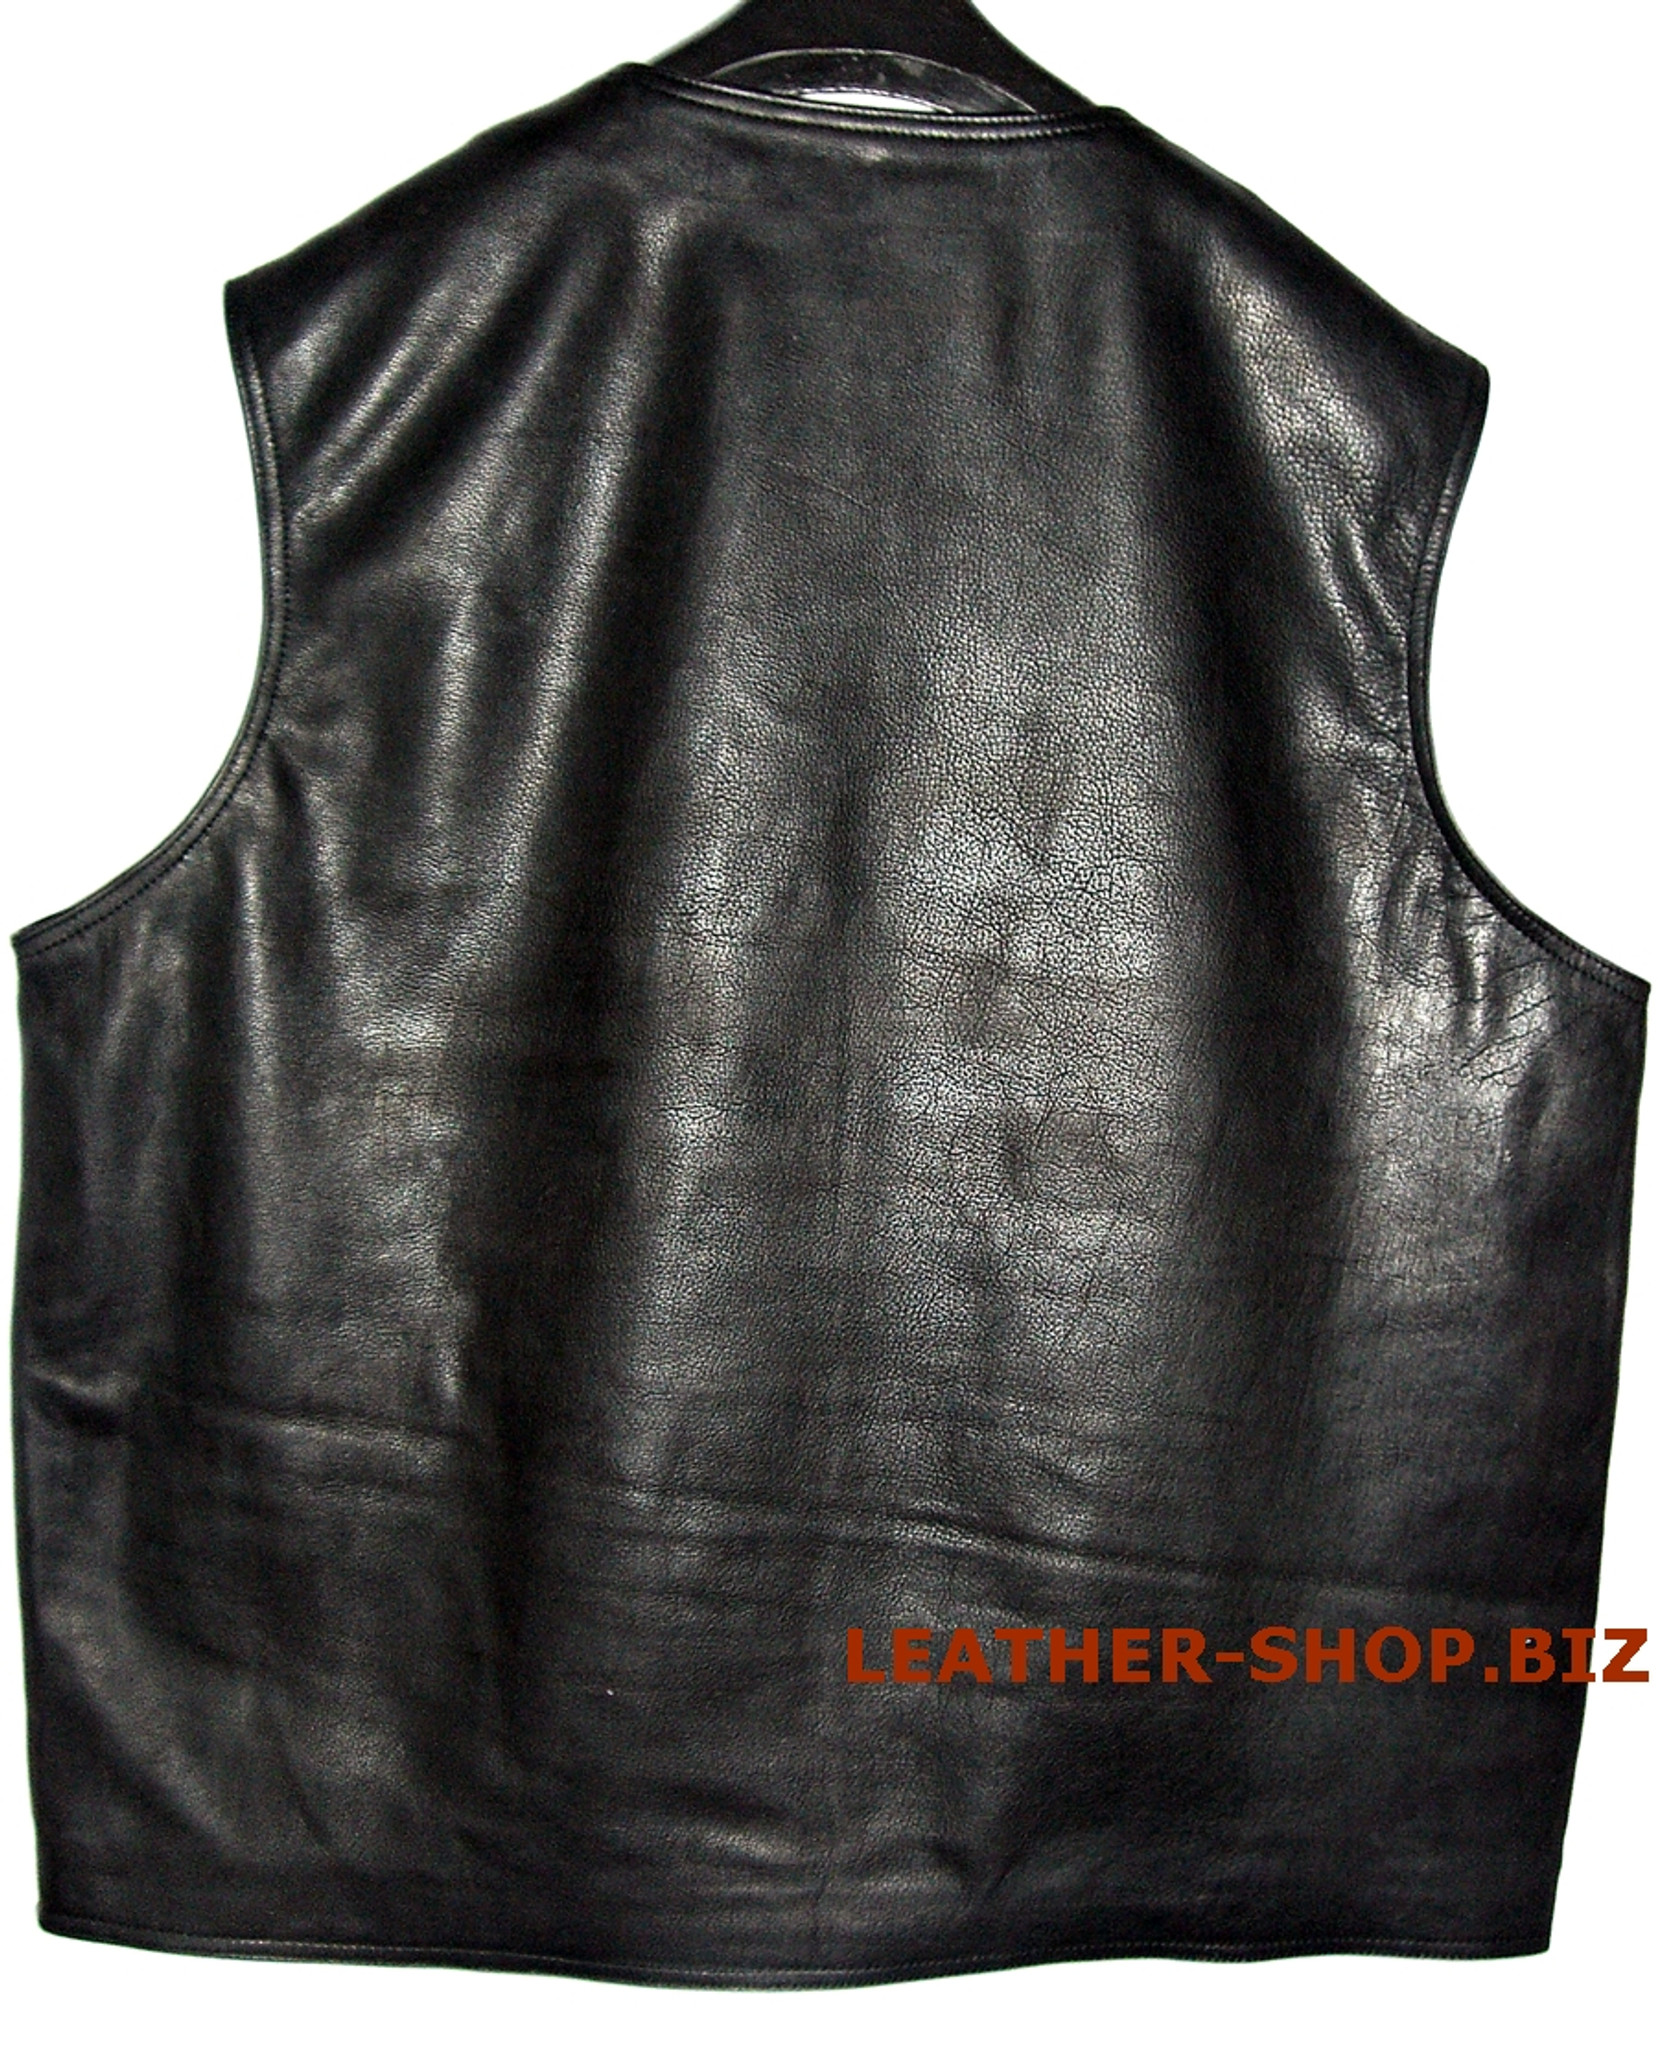 Mens Leather Vest Style MLV097 available in 8 colors.